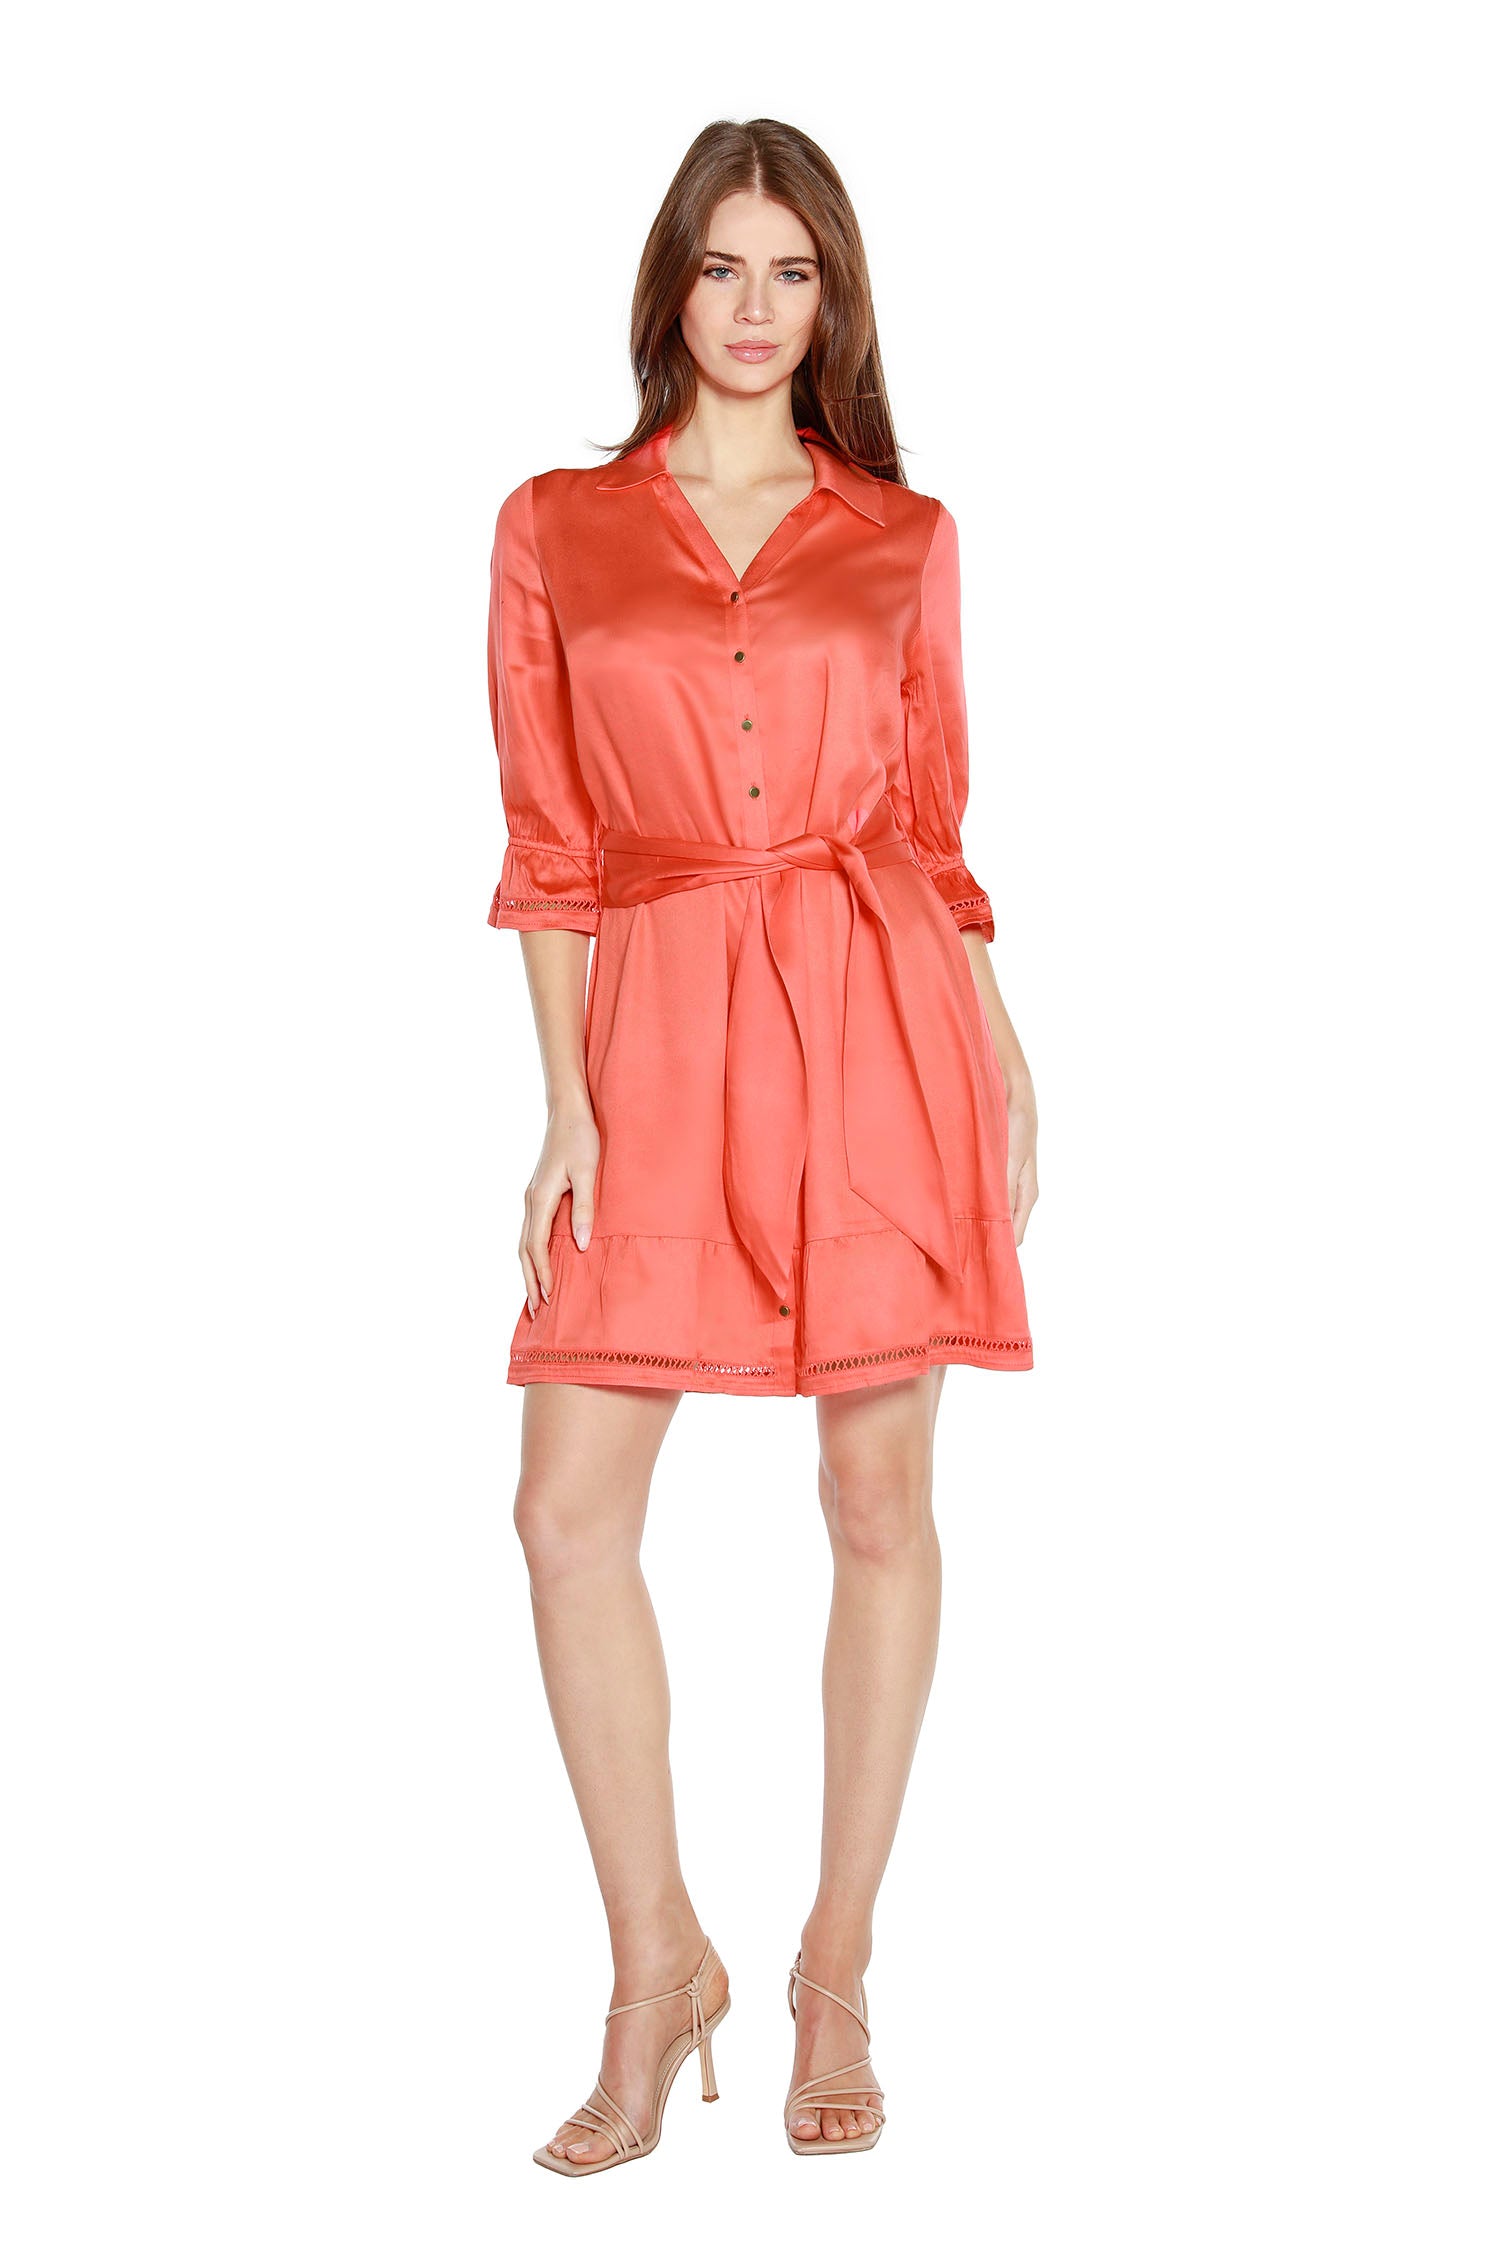 Women's Silky Rayon Button-Up Shirtdress with Ruffled Sleeves